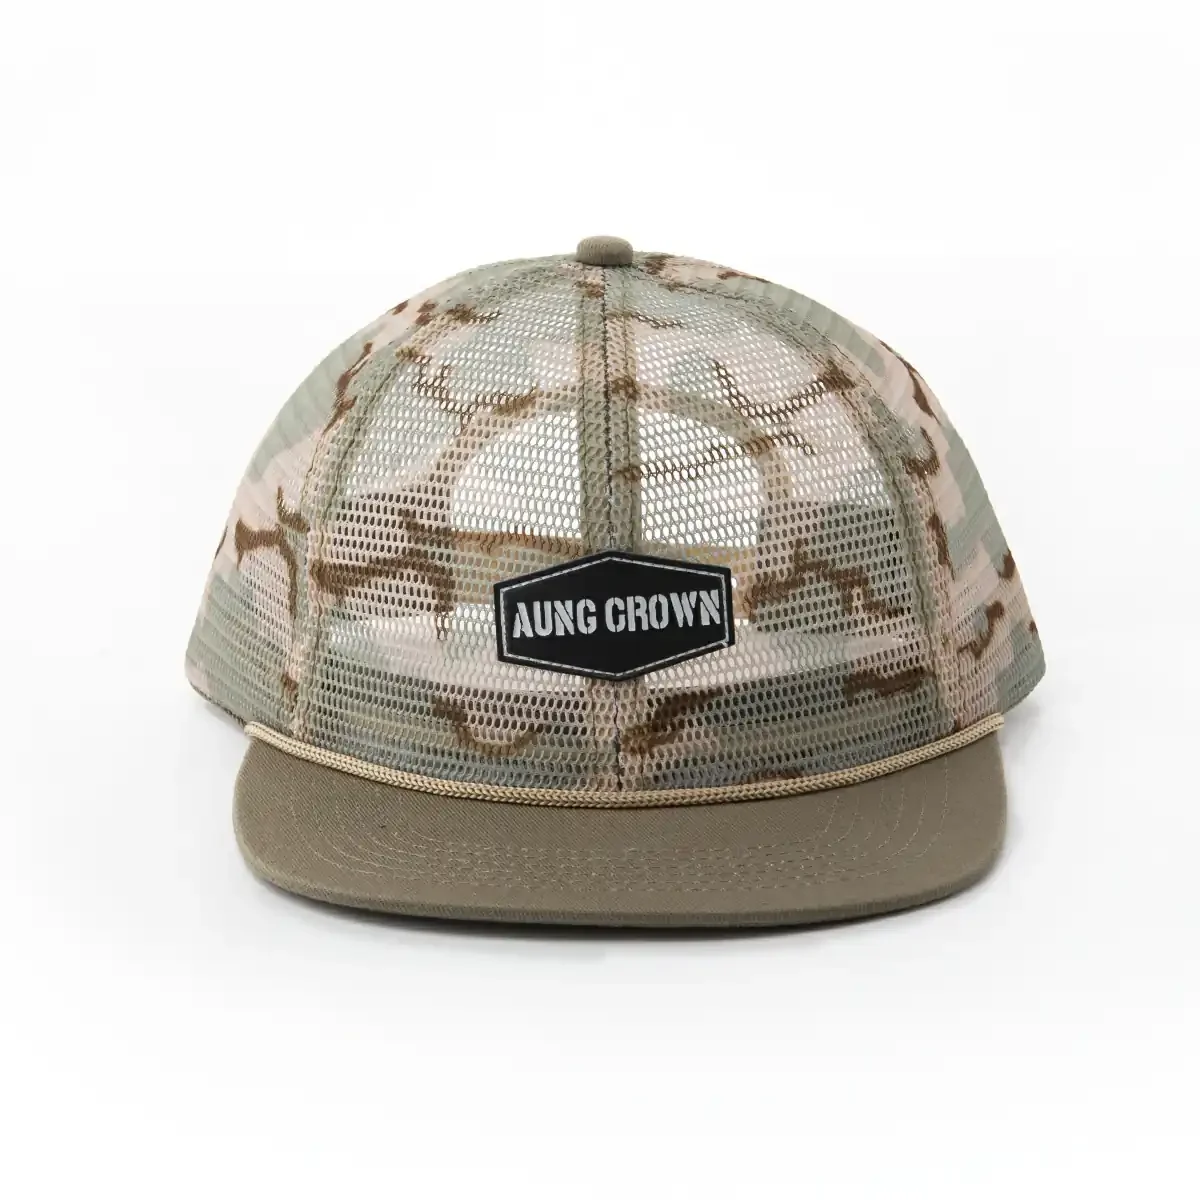 Aung-Crown-mens-khaki-trucker-hat-for-outdoors-SFA-210409-1